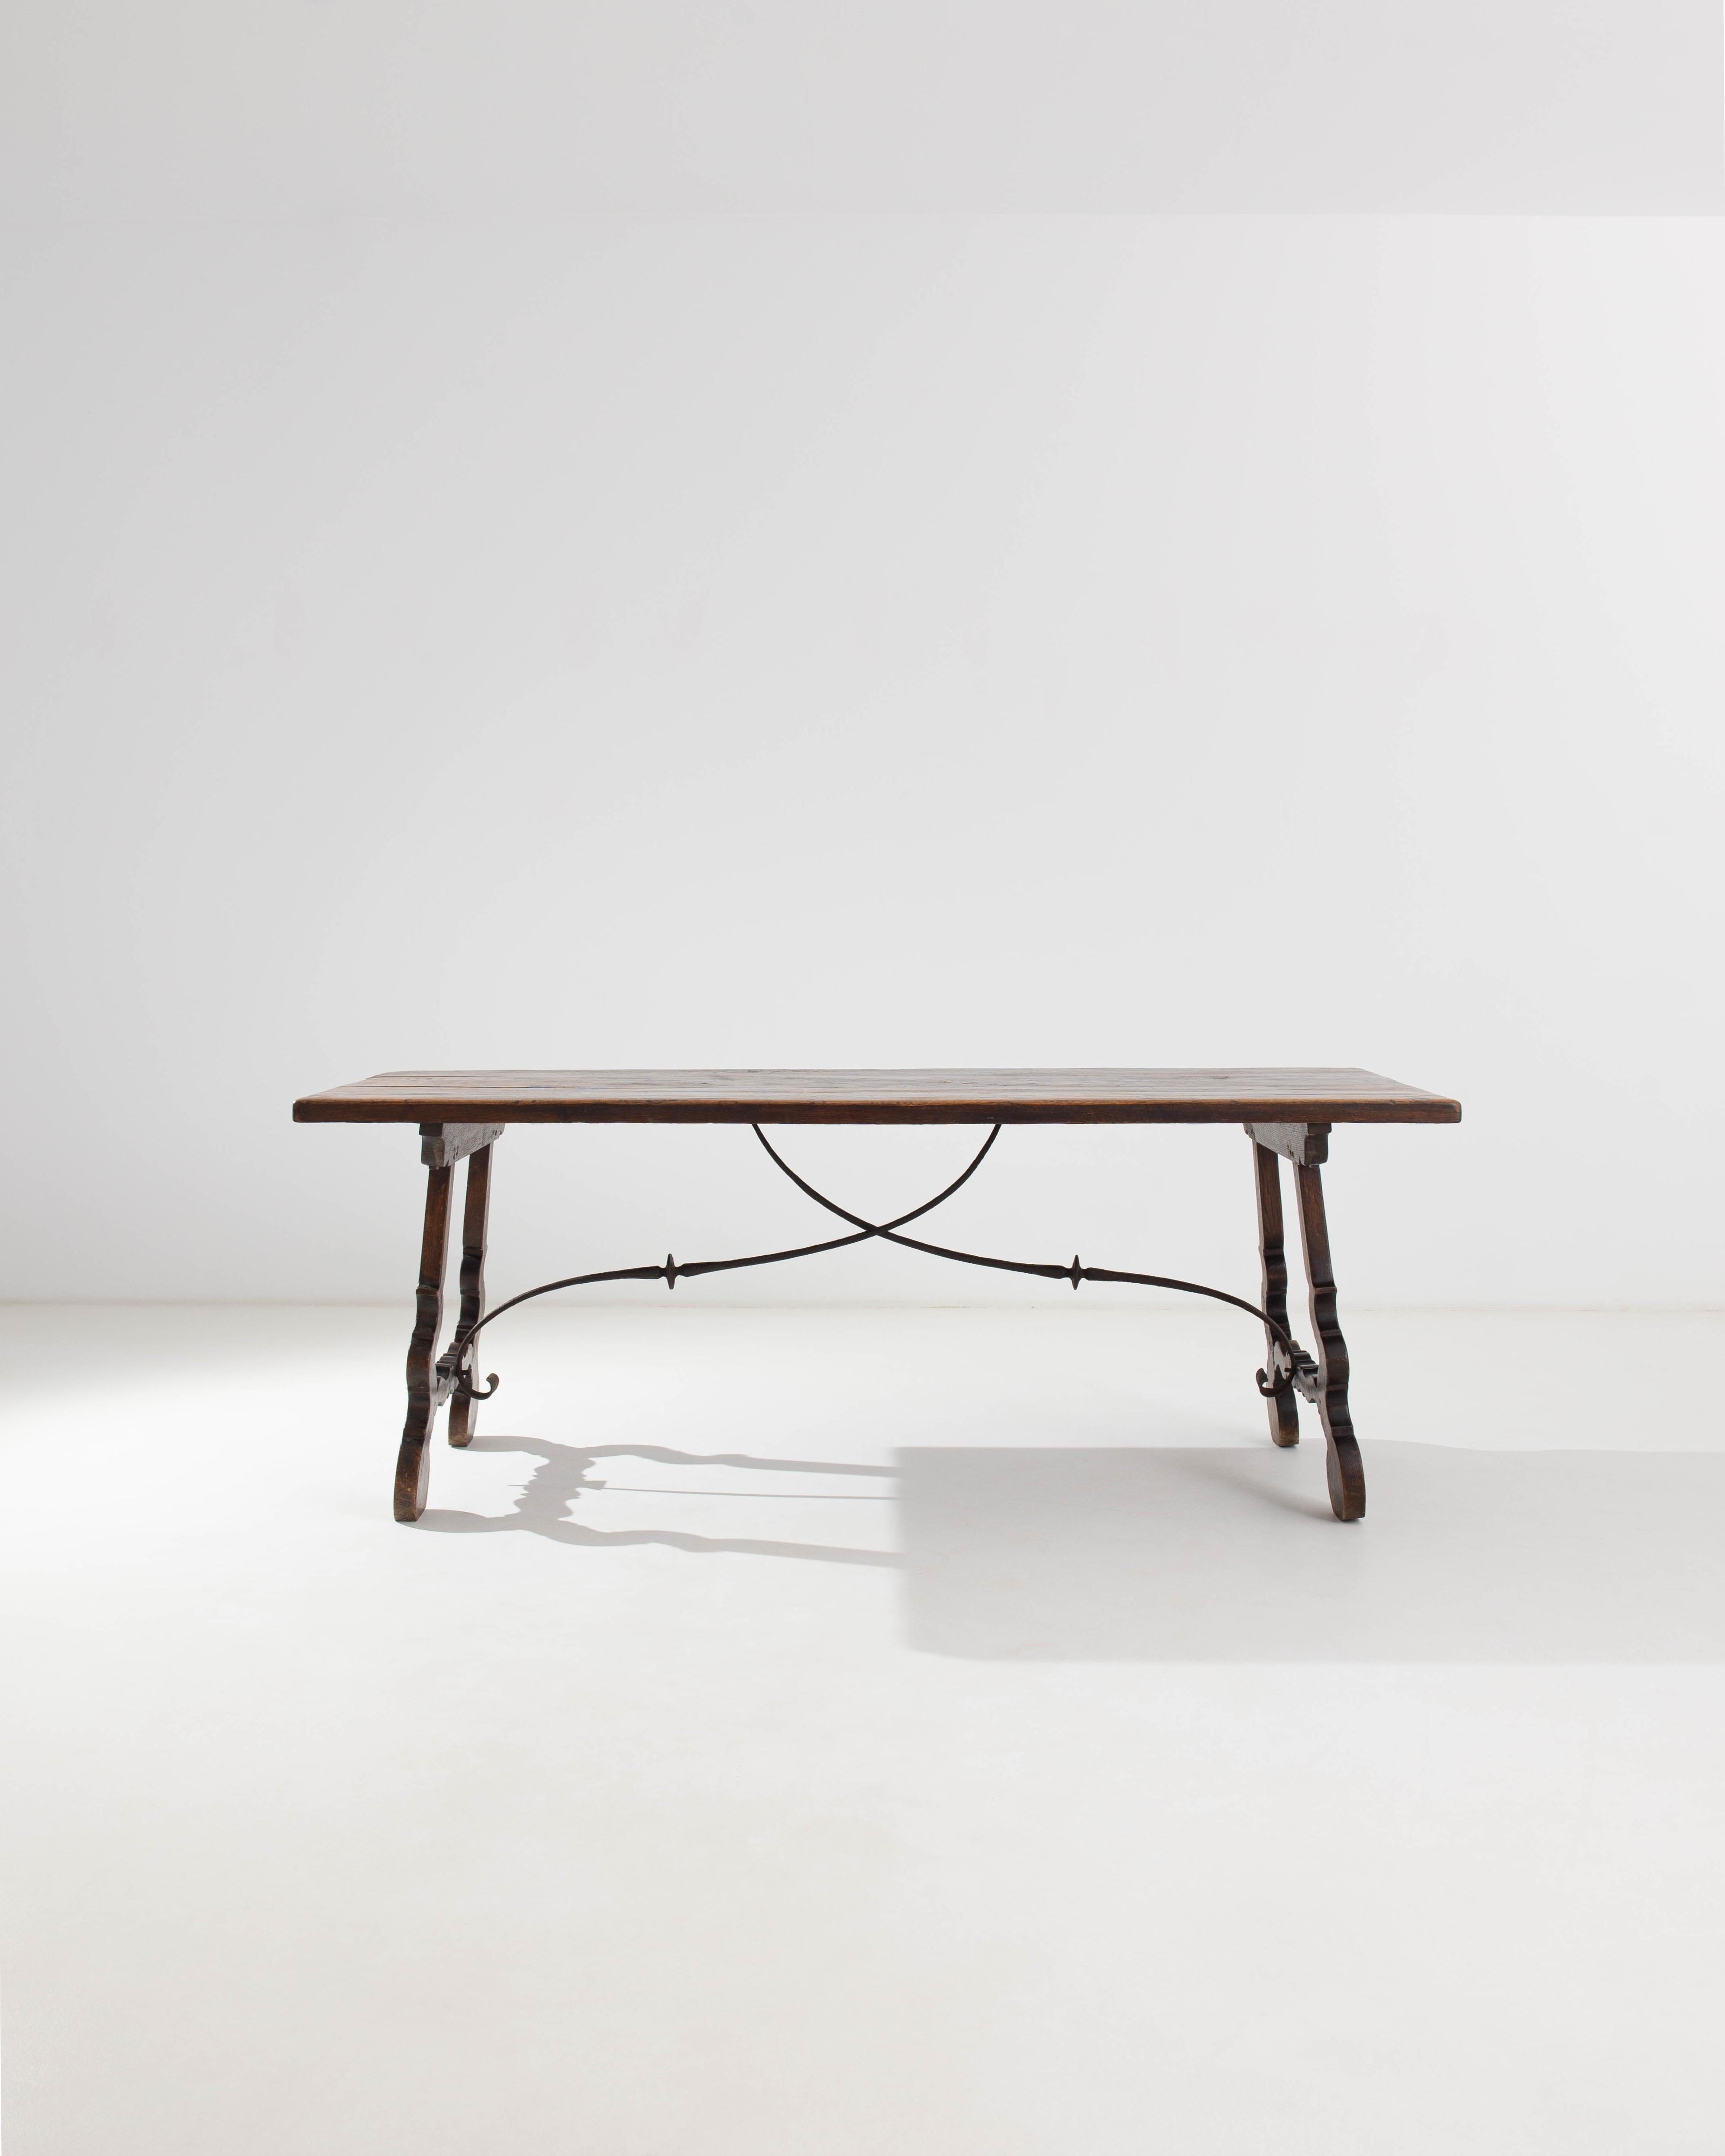 The design of this antique wooden dining table is handsome and poetic; the rich patina of the dark wood has a beauty all its own. Made in Spain in the 1800s, the form is an elegant interpretation of the trestle table, elevated by the intricate shape